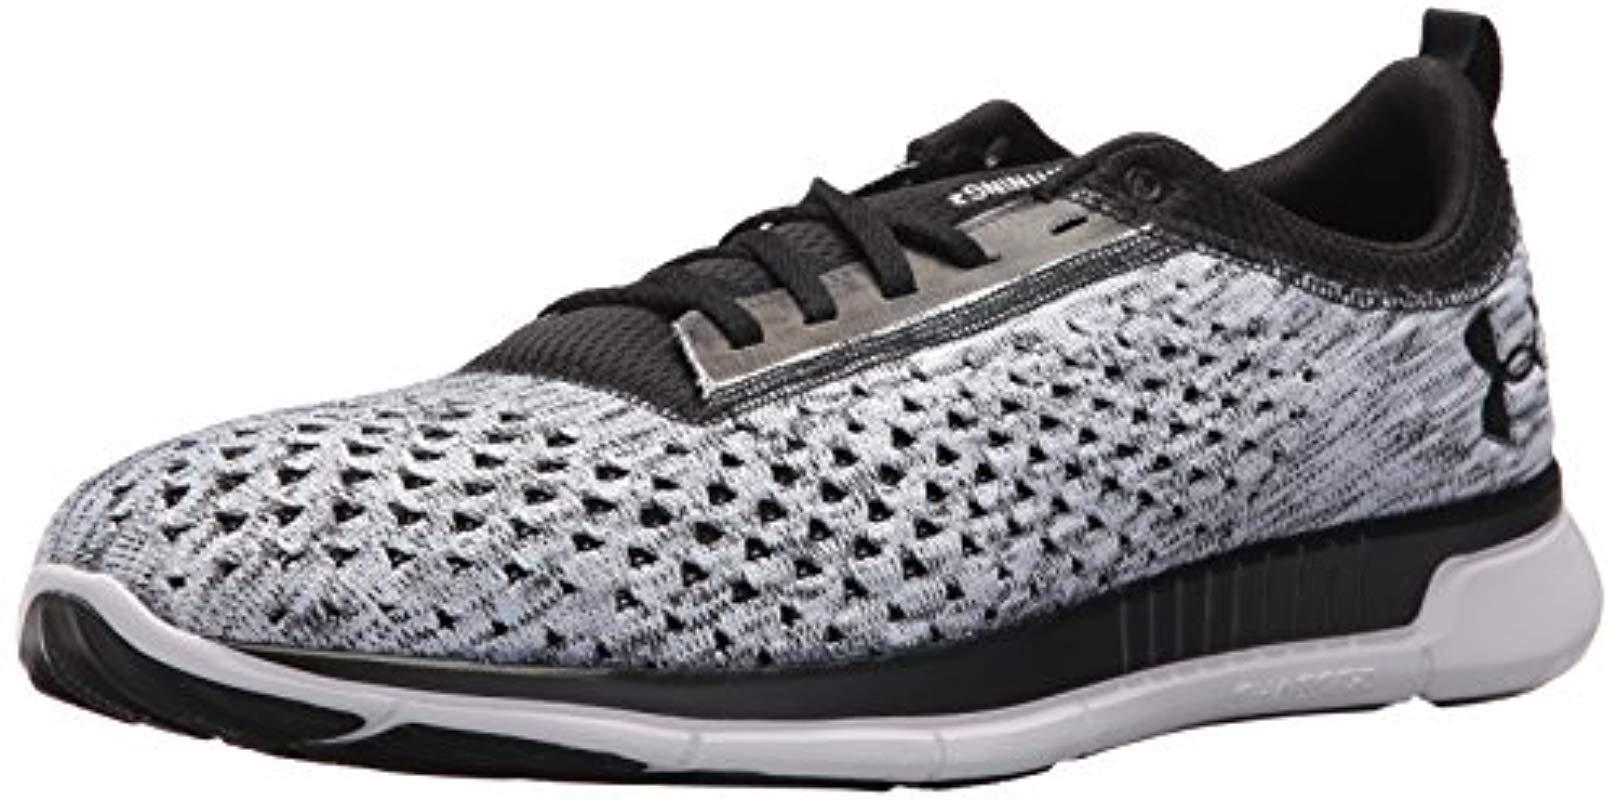 Details about   Under Armour Unisex Sports Running Trainers UA Lightning 2 Lace Up   Black/White 